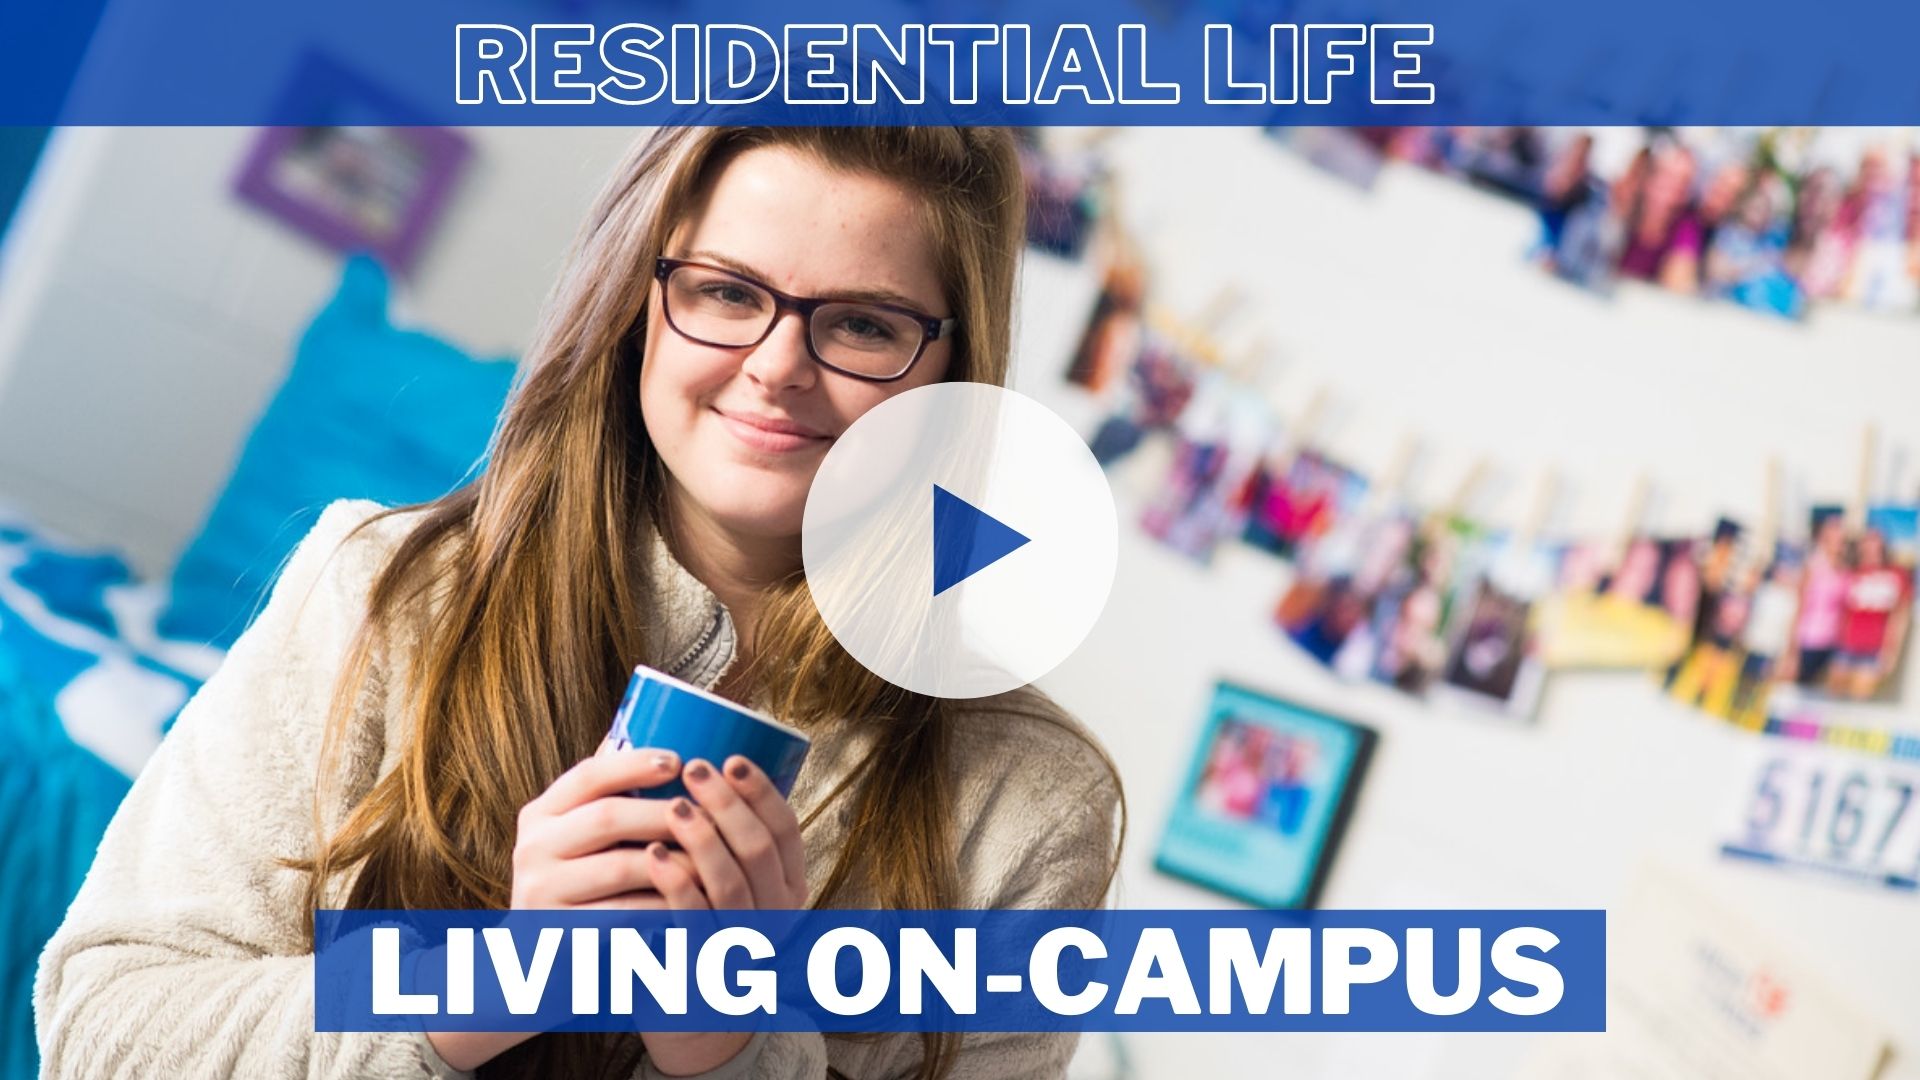 Living On-Campus (Residential Life)